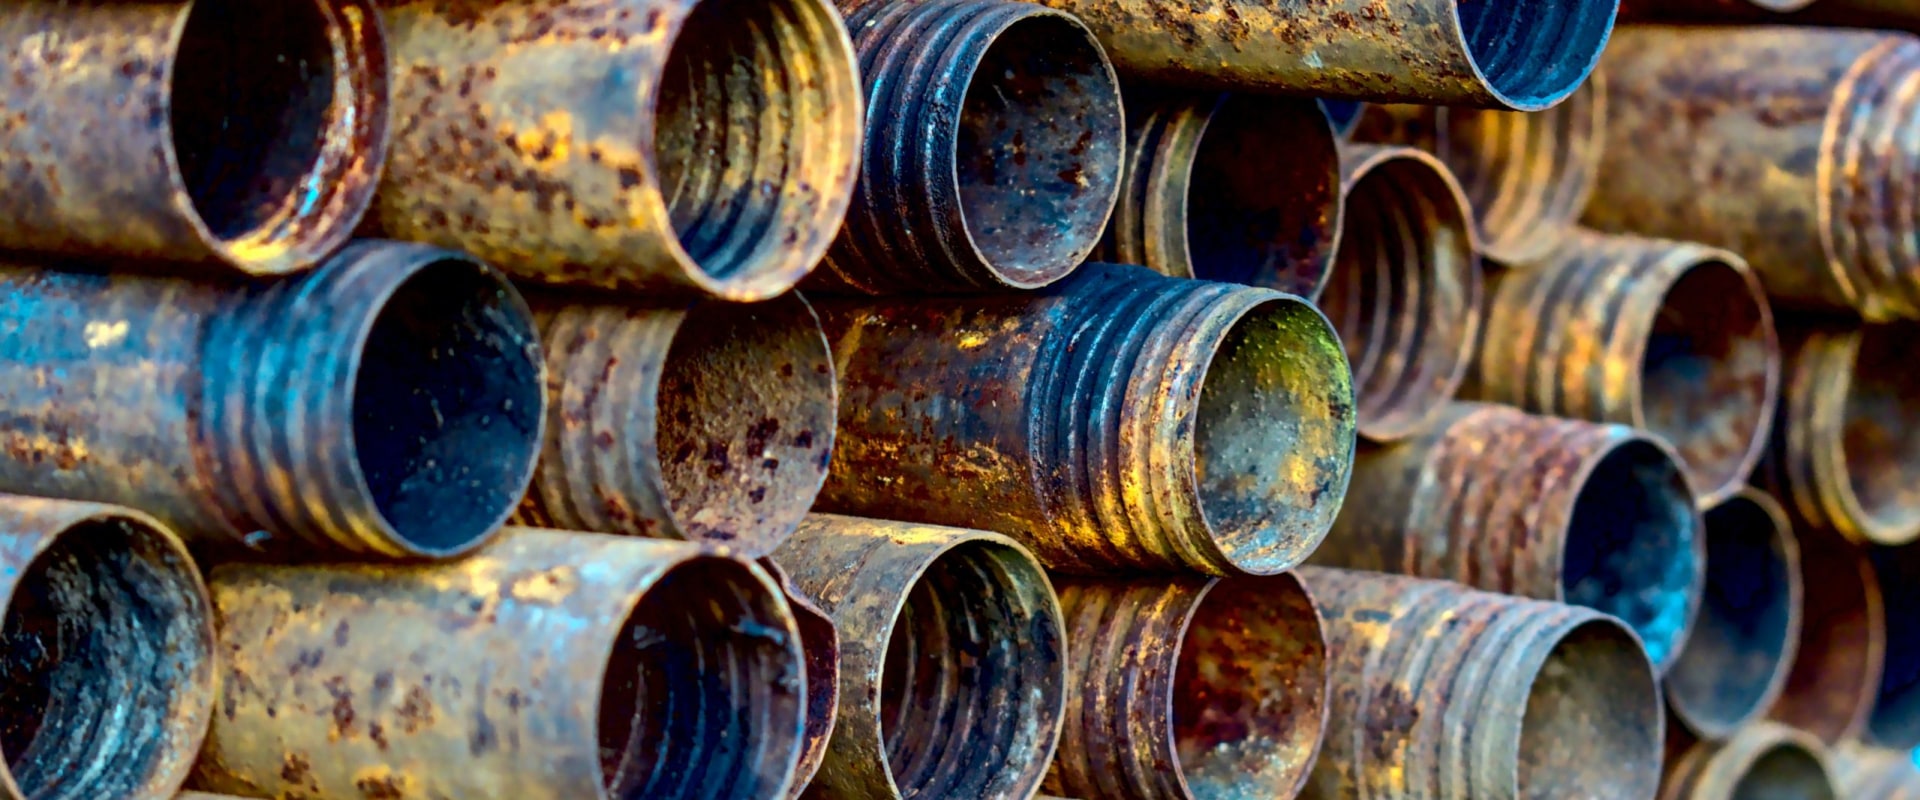 Do gas pipes corrode?